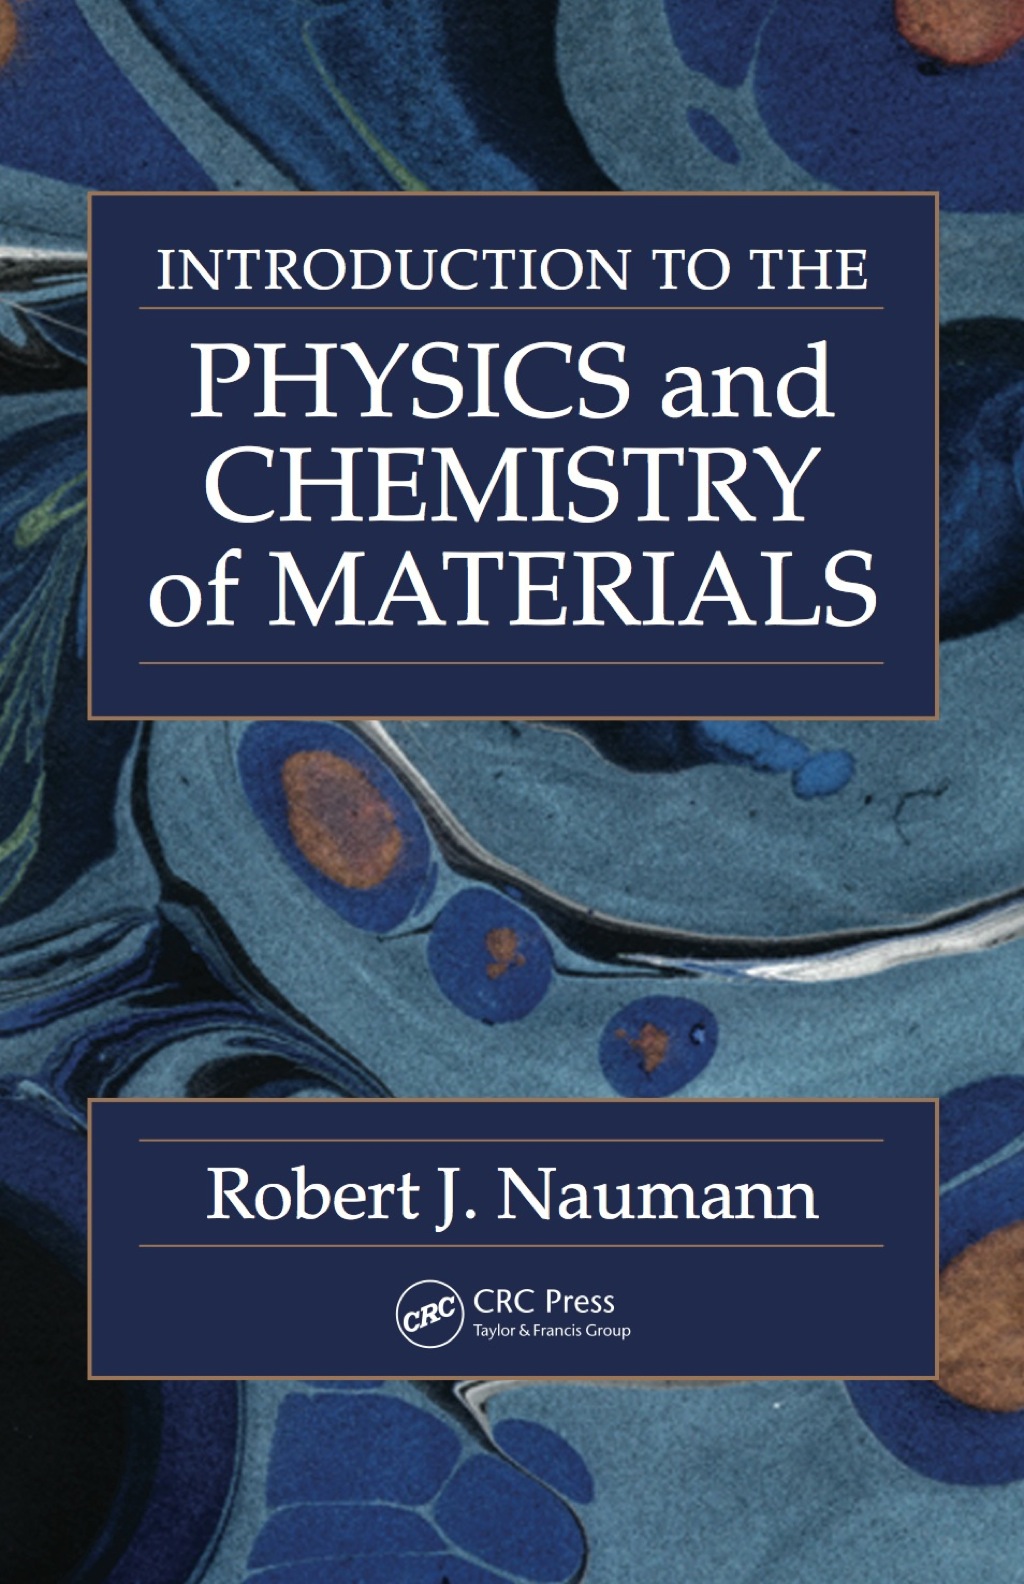 Introduction to the Physics and Chemistry of Materials (eBook) - Robert J. Naumann